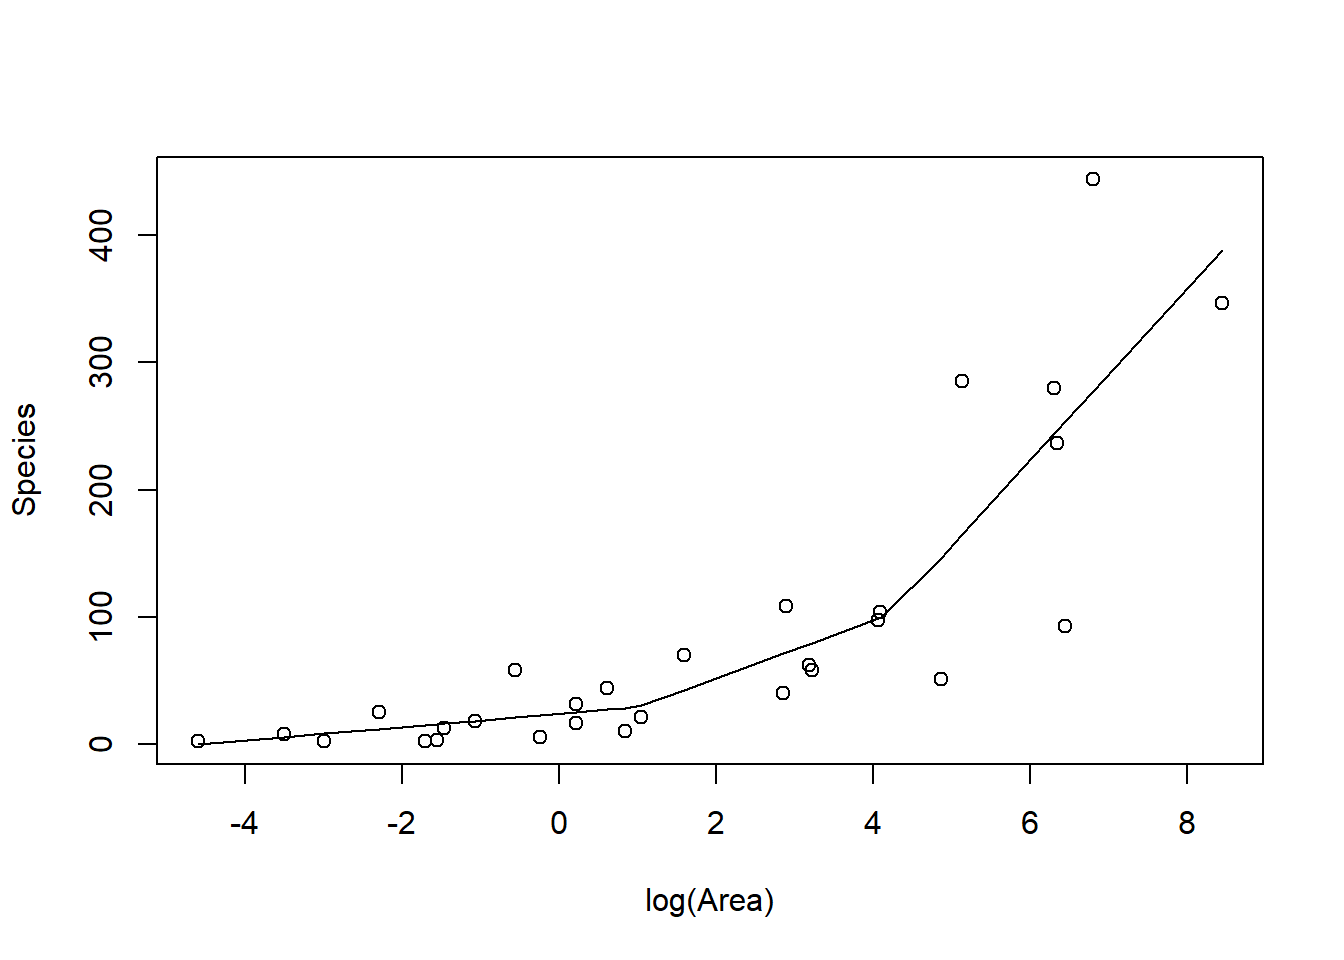 Piecewise linear model relating plant species richness to log(Area) for 29 islands in the Galapagos Islands archipelago. Data are from M. P. Johnson & Raven (1973).